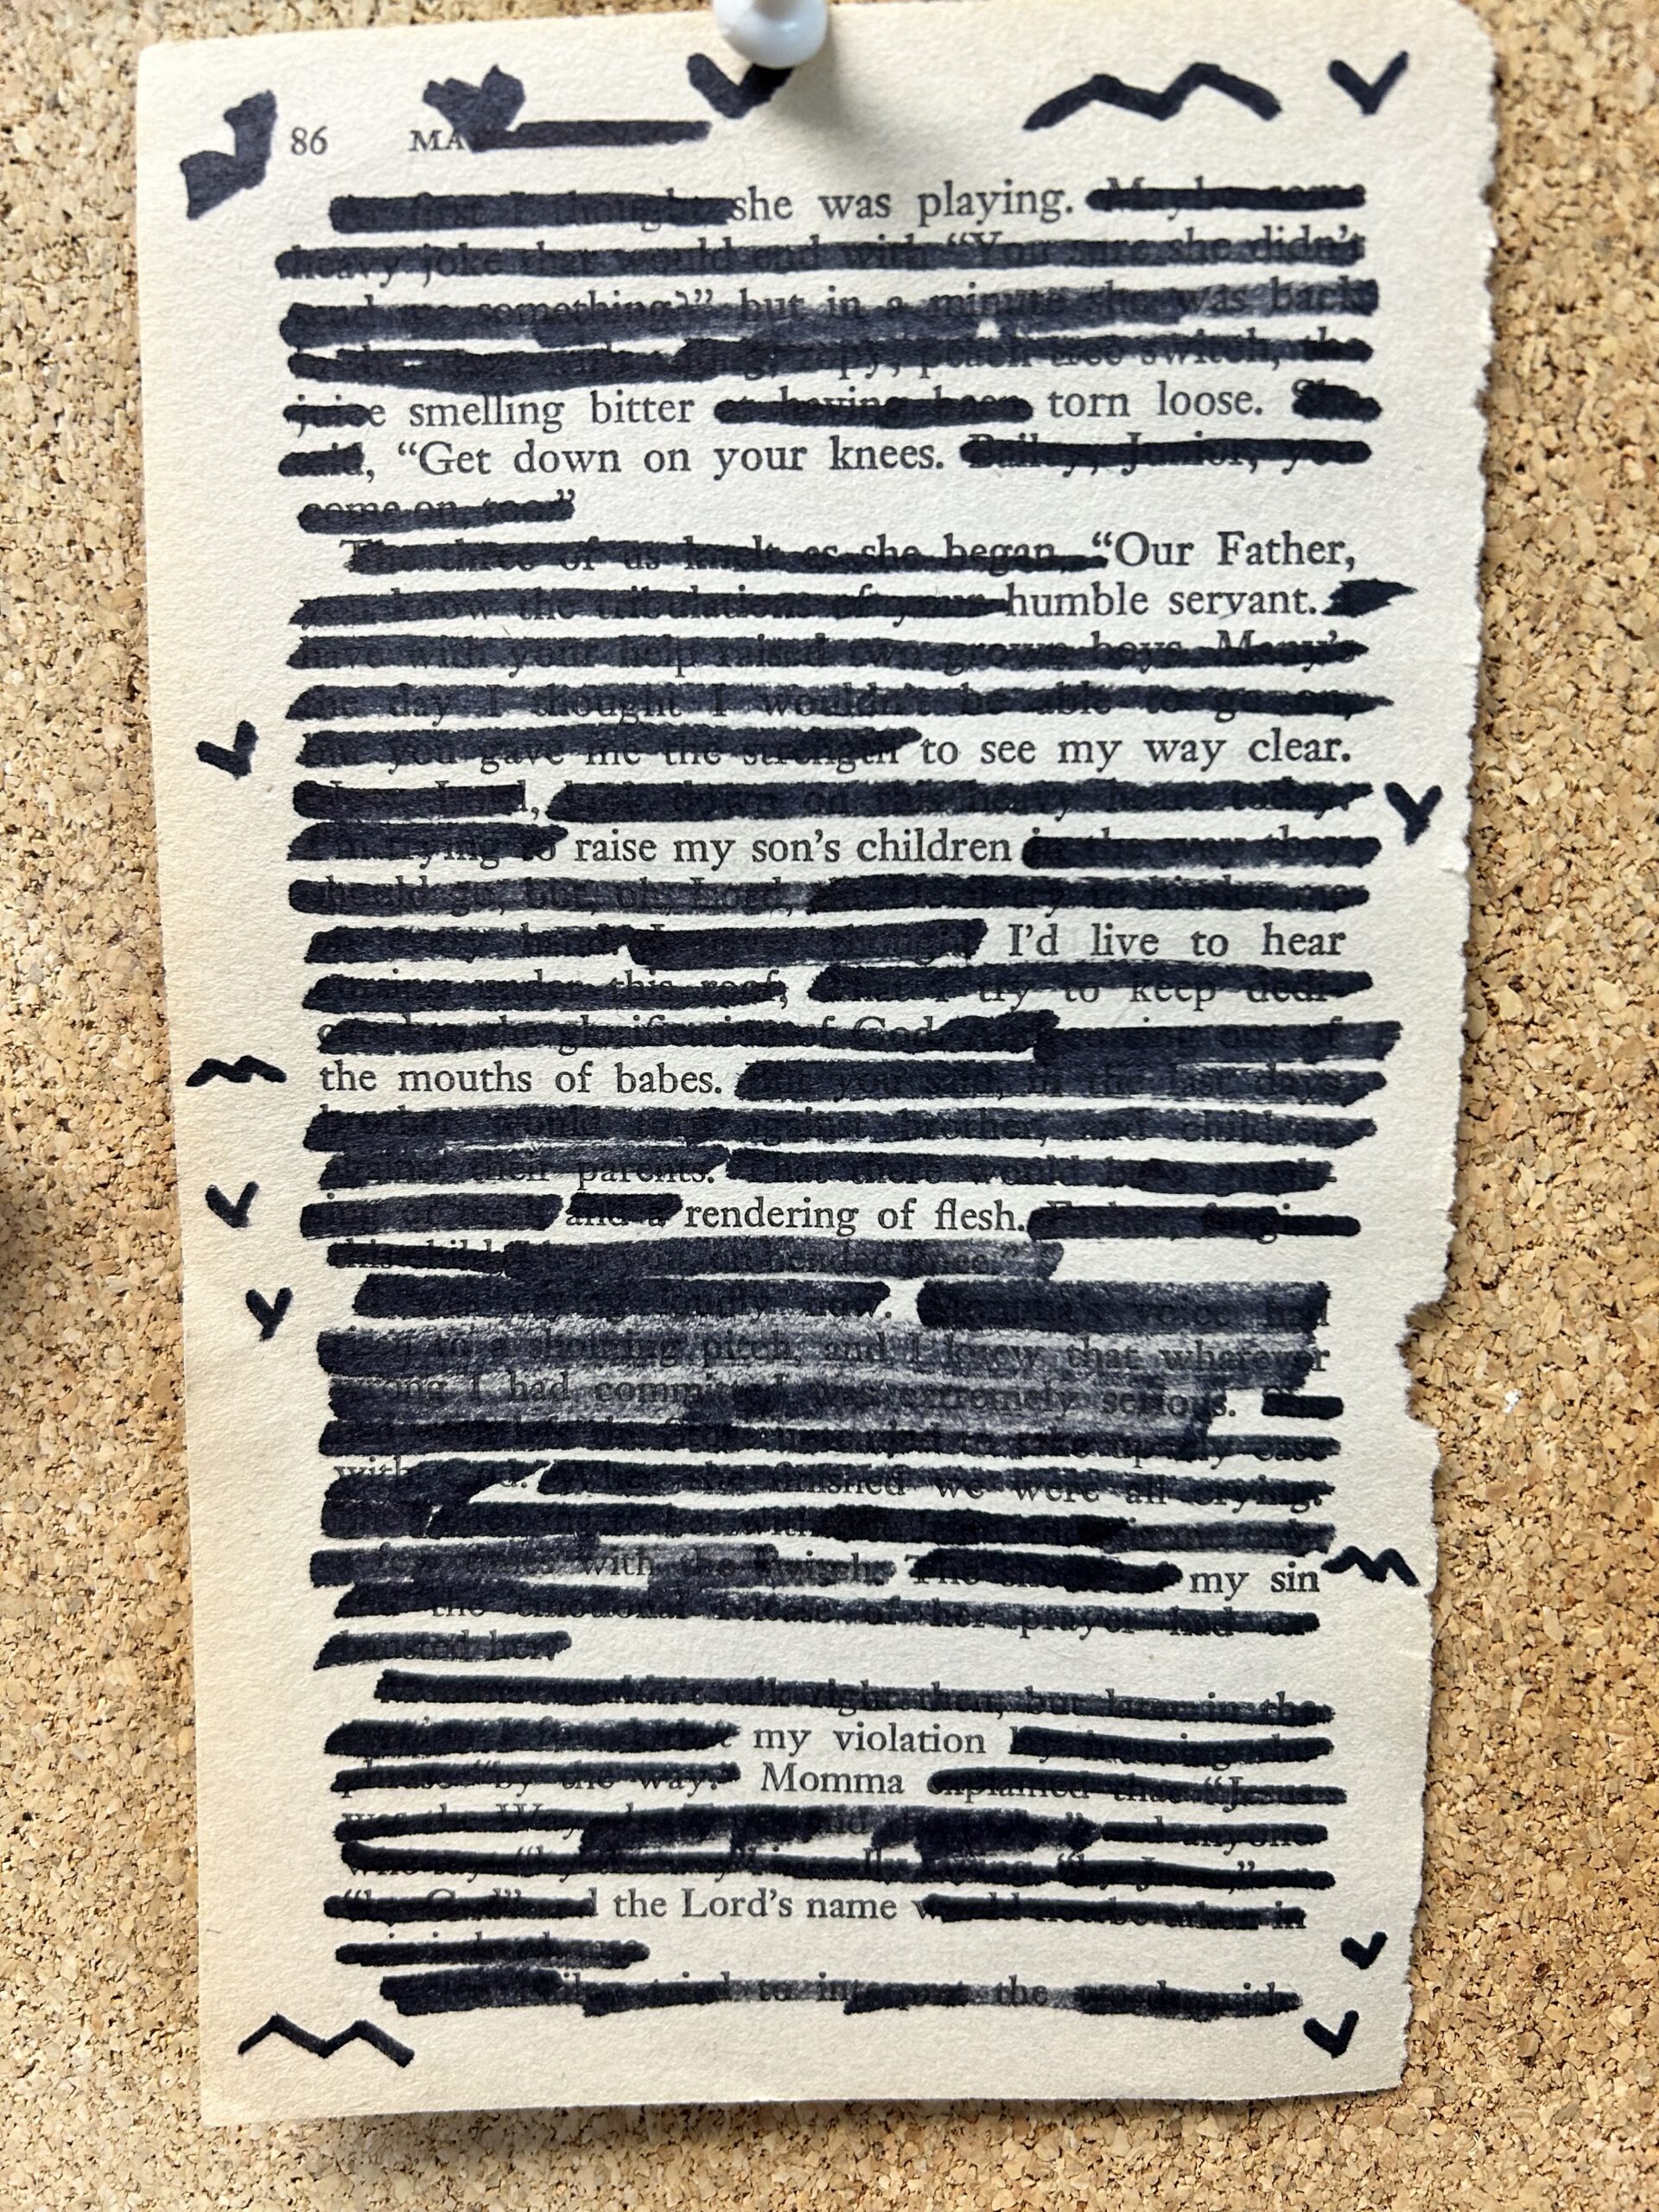 A paperback book page with some words on it but with most words blacked out with magic marker